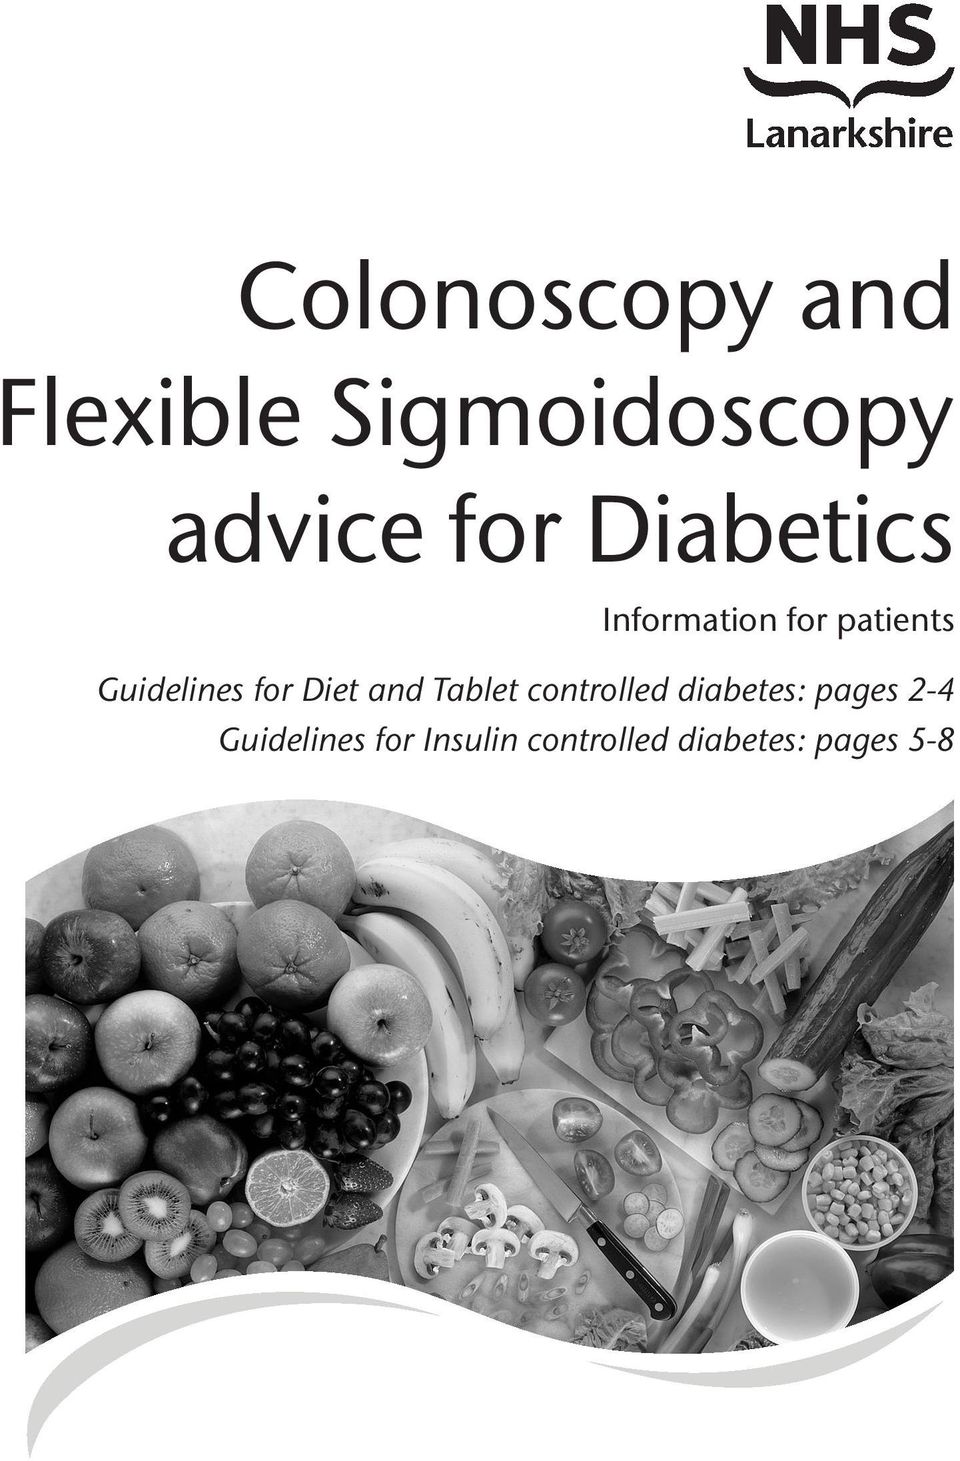 Diet and Tablet controlled diabetes: pages 2-4